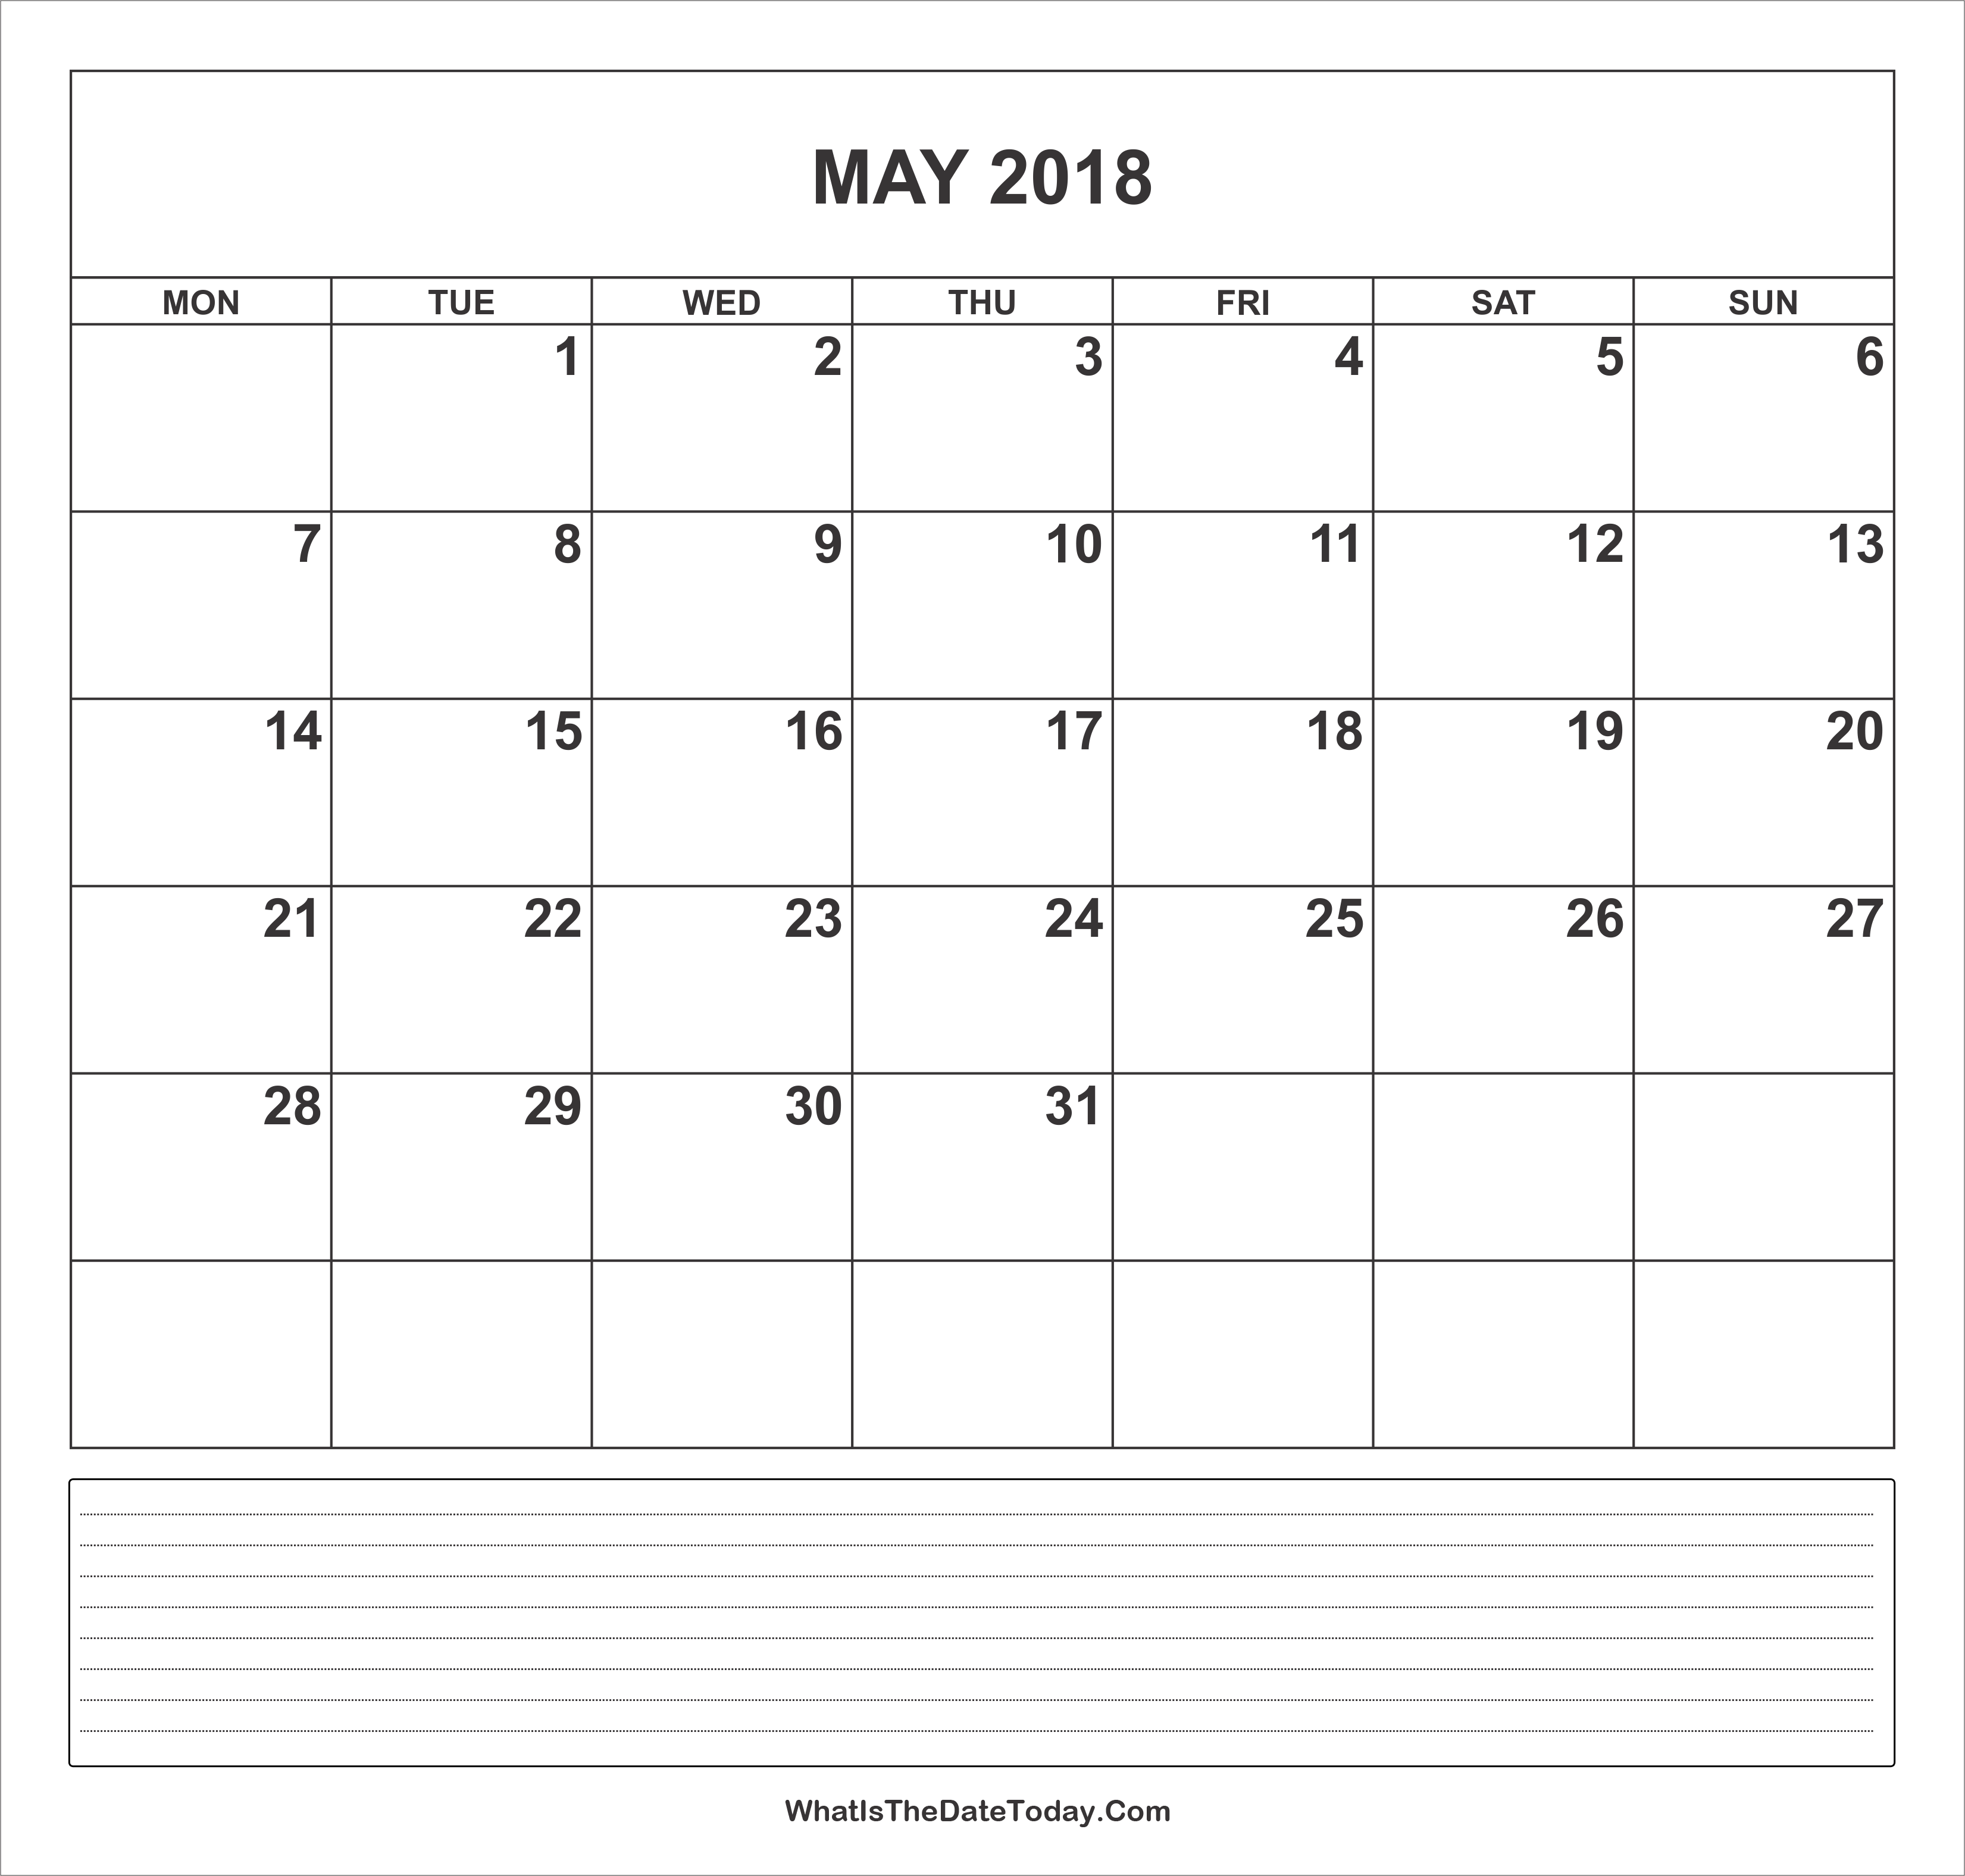 calendar-may-2018-with-notes-whatisthedatetoday-com